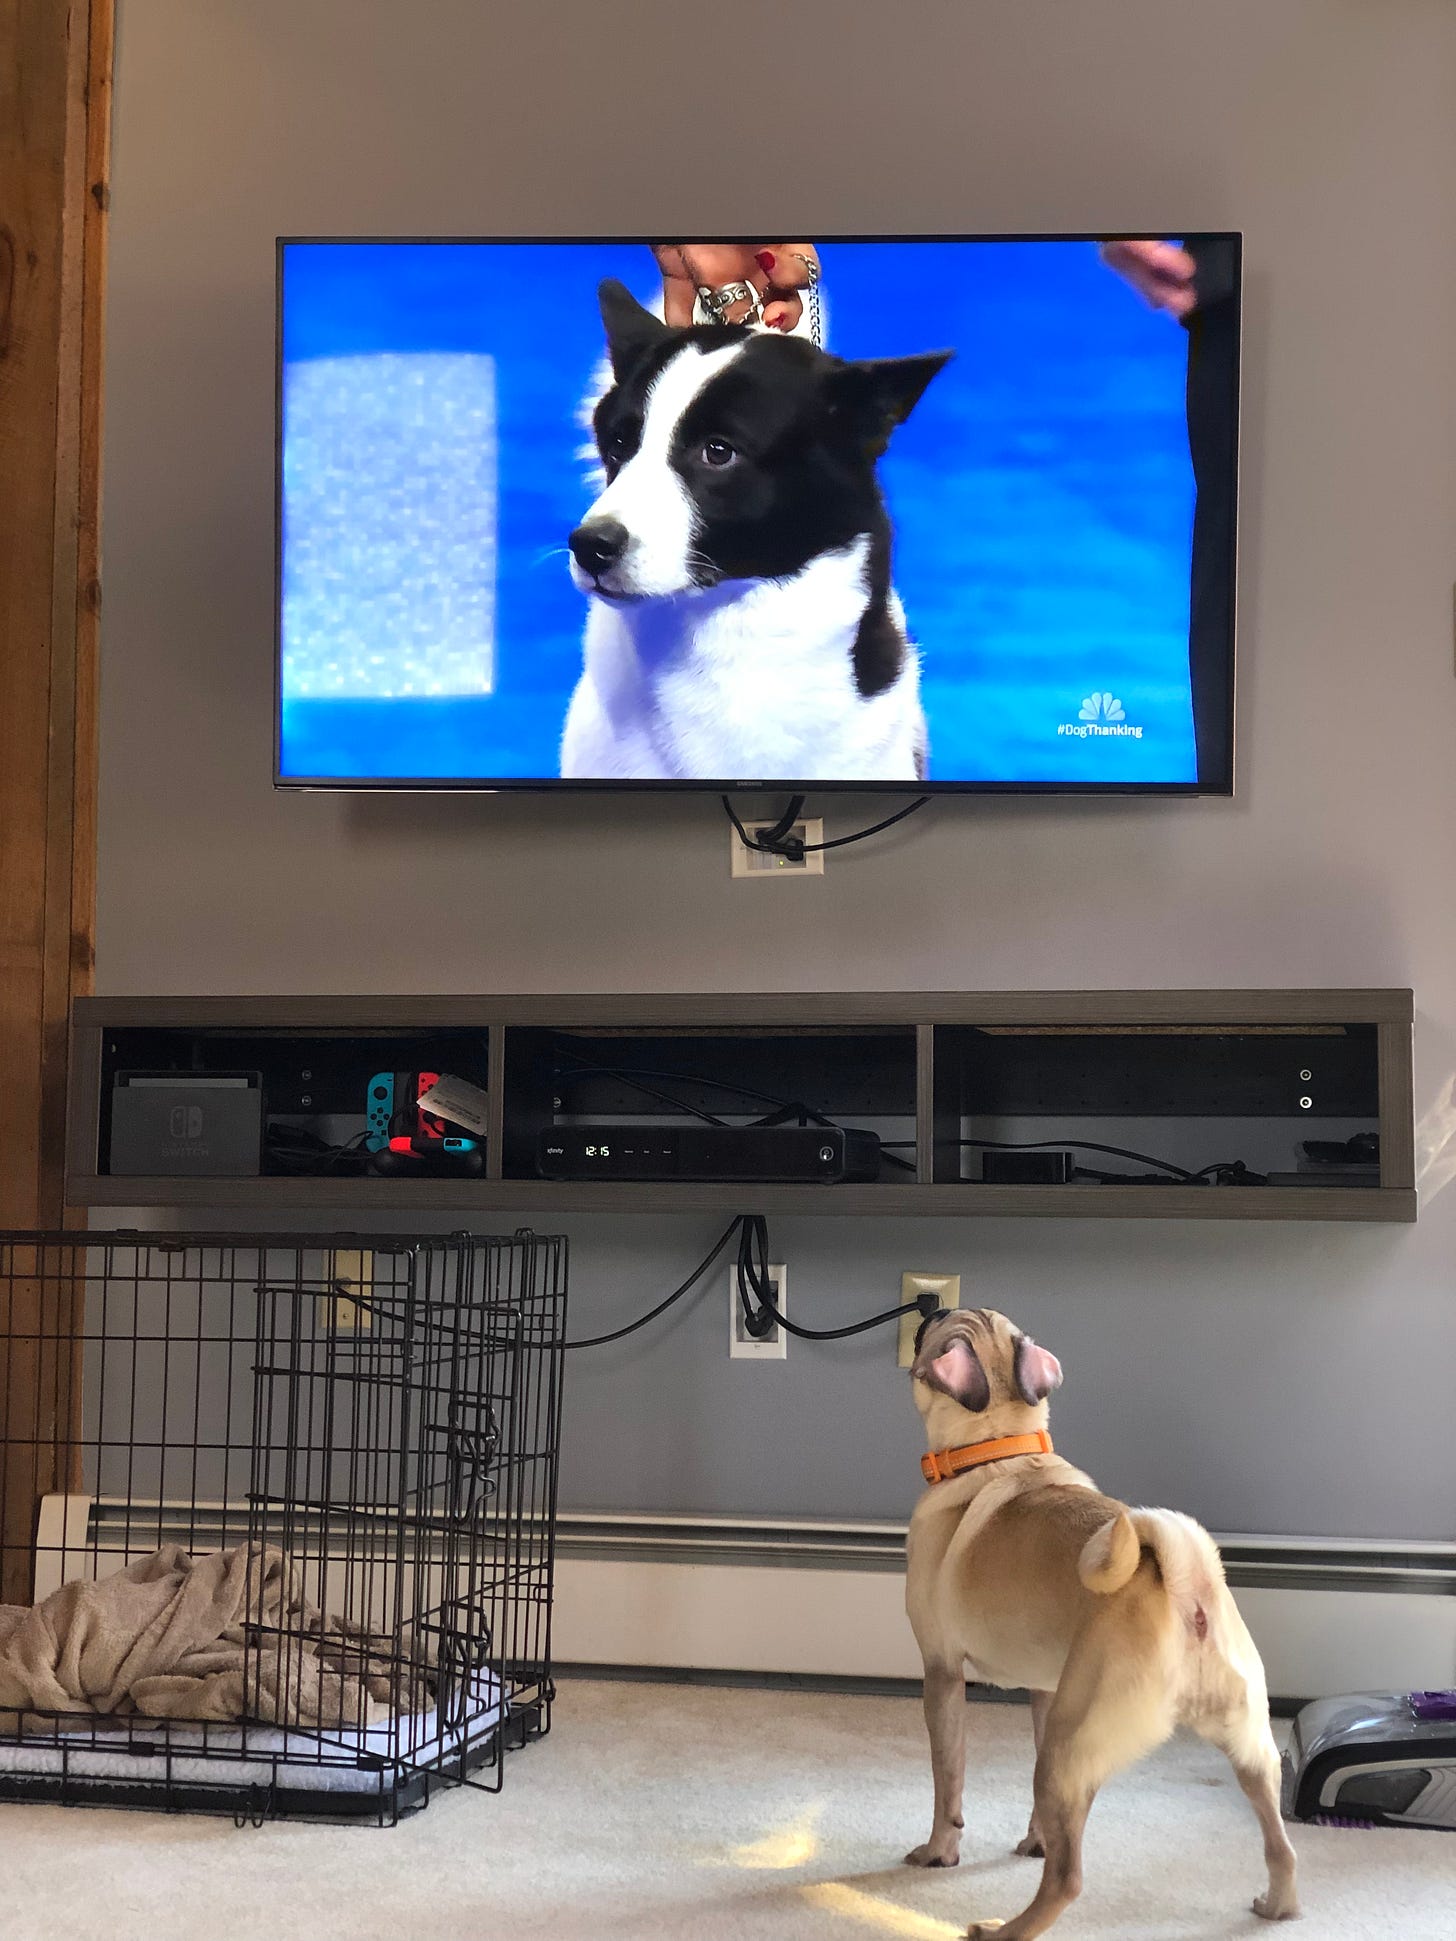 A small pug dog watching a dog show on television